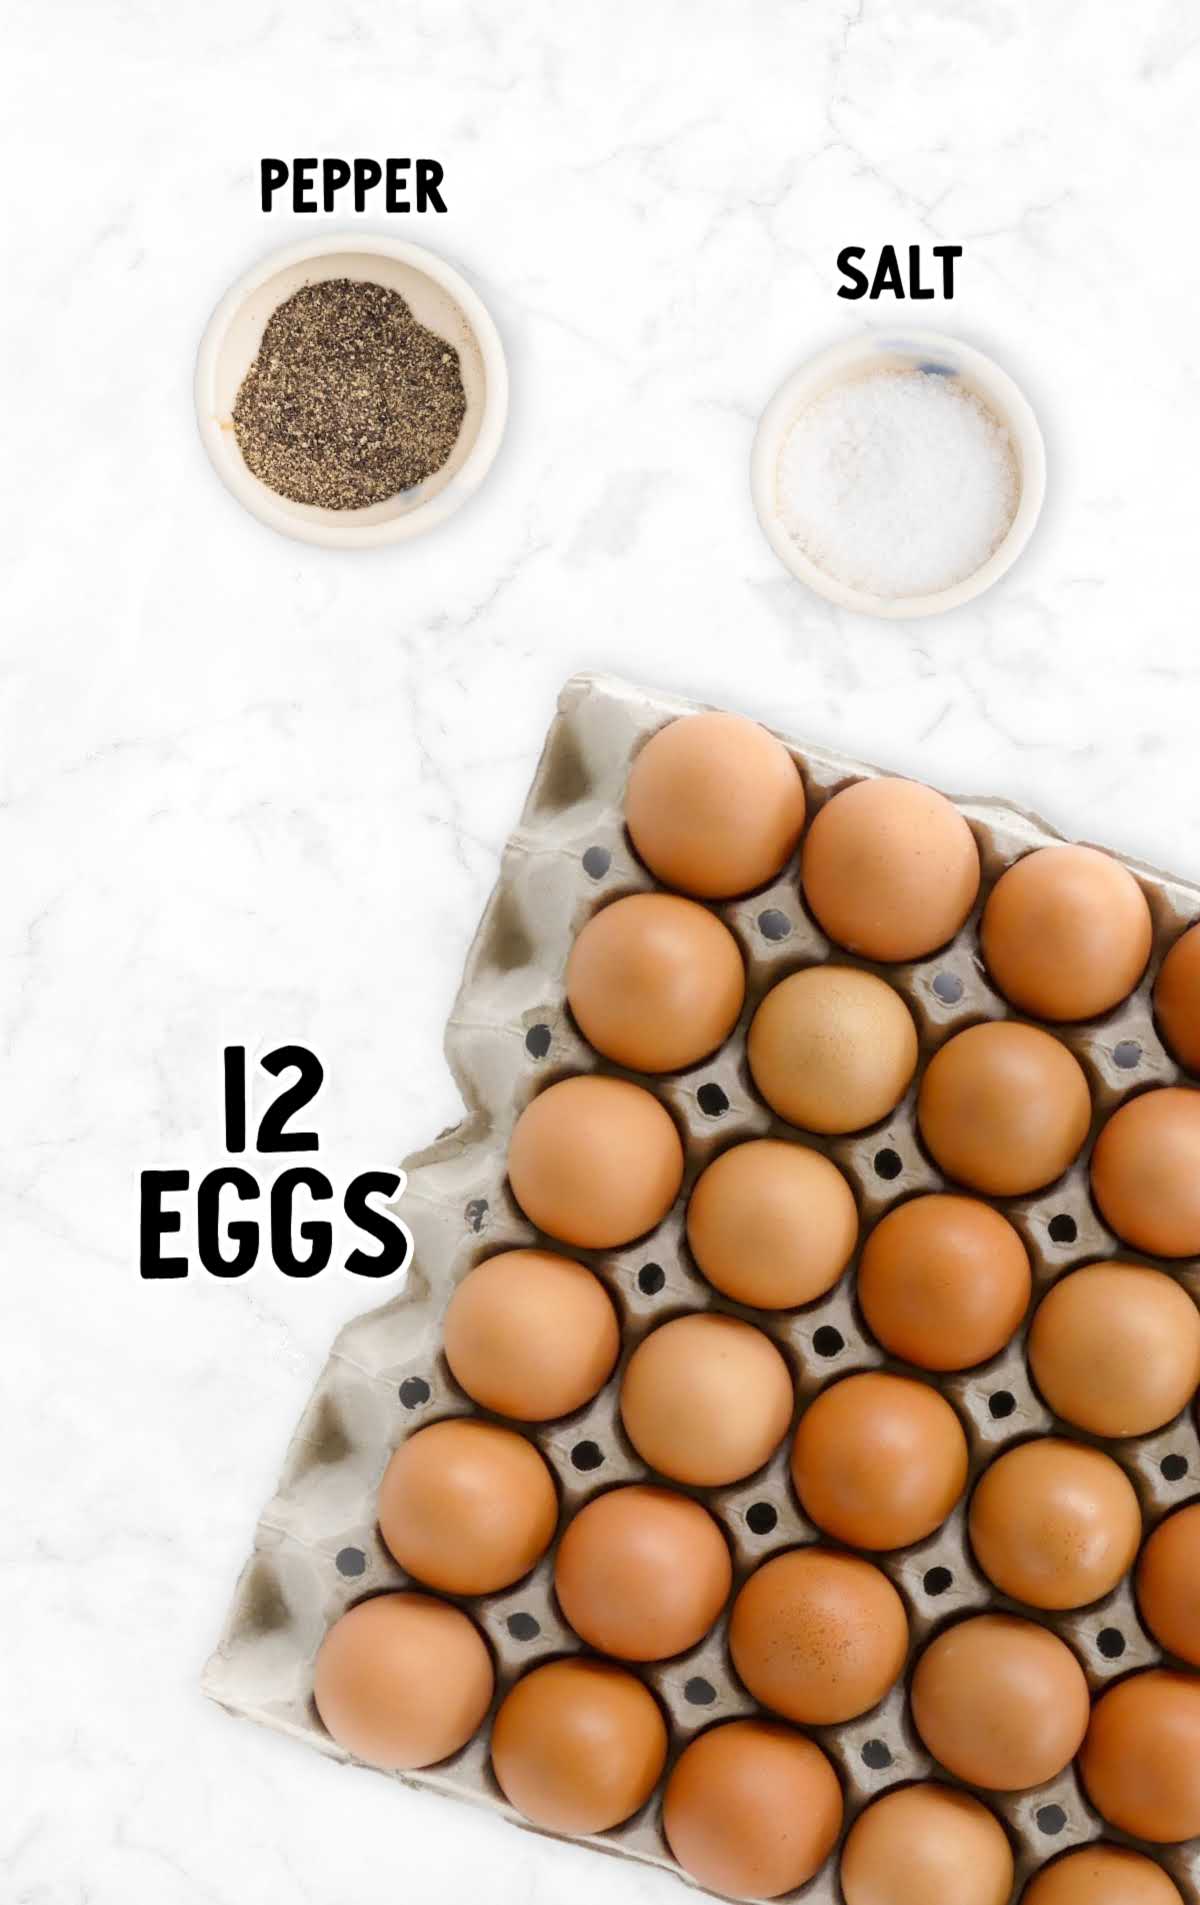 Sheet Pan Eggs raw ingredients that are labeled